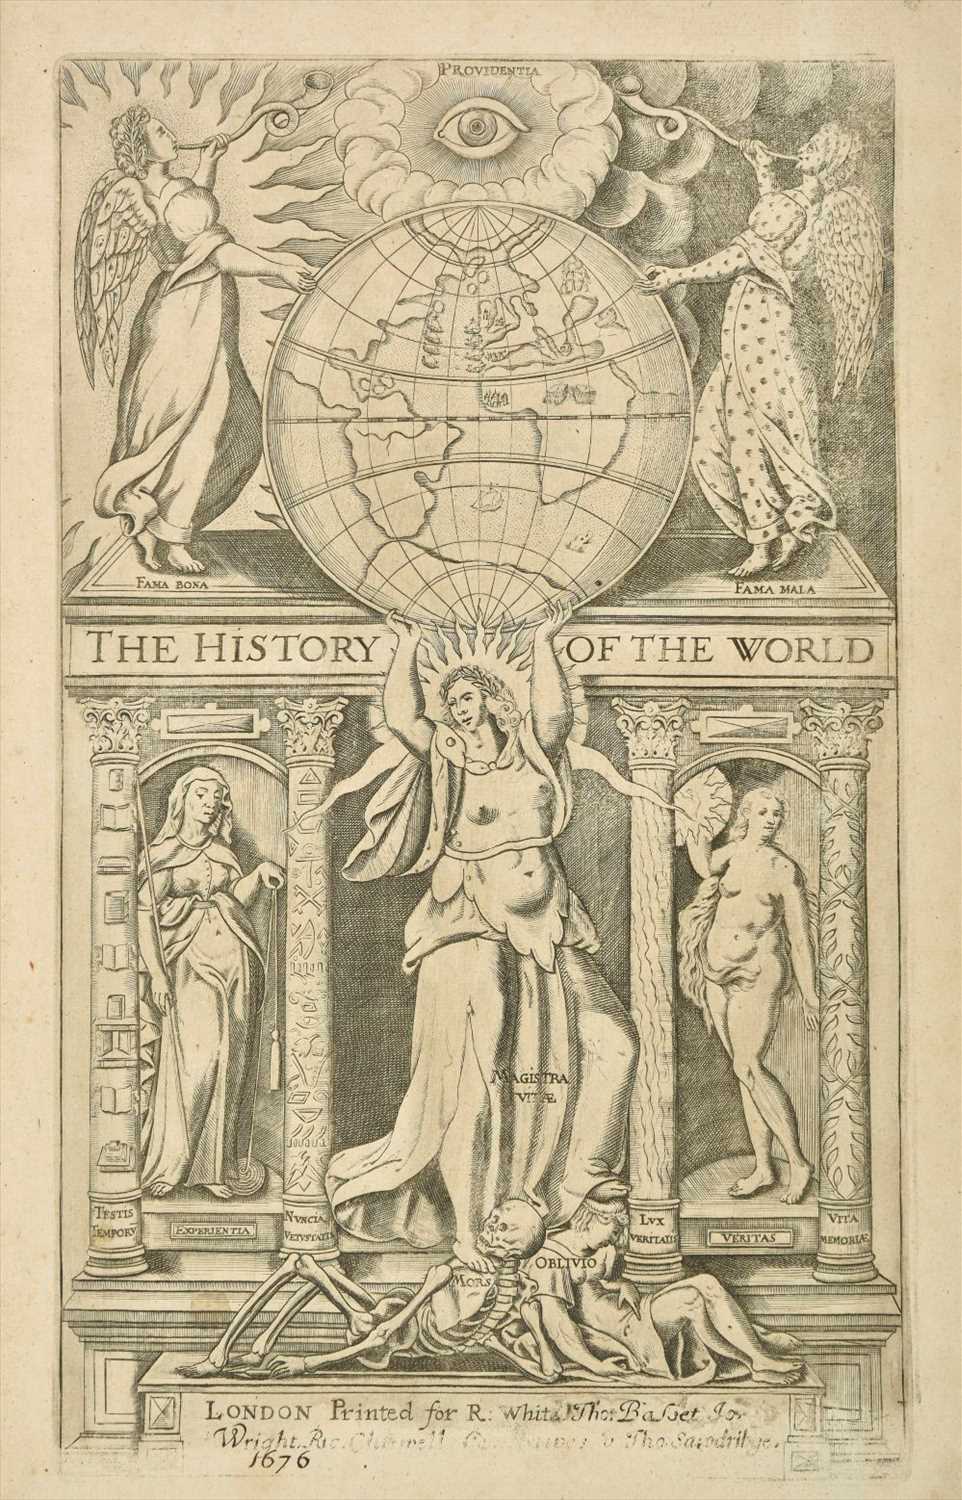 Lot 45 - Raleigh (Sir Walter). The History of the World, 1677